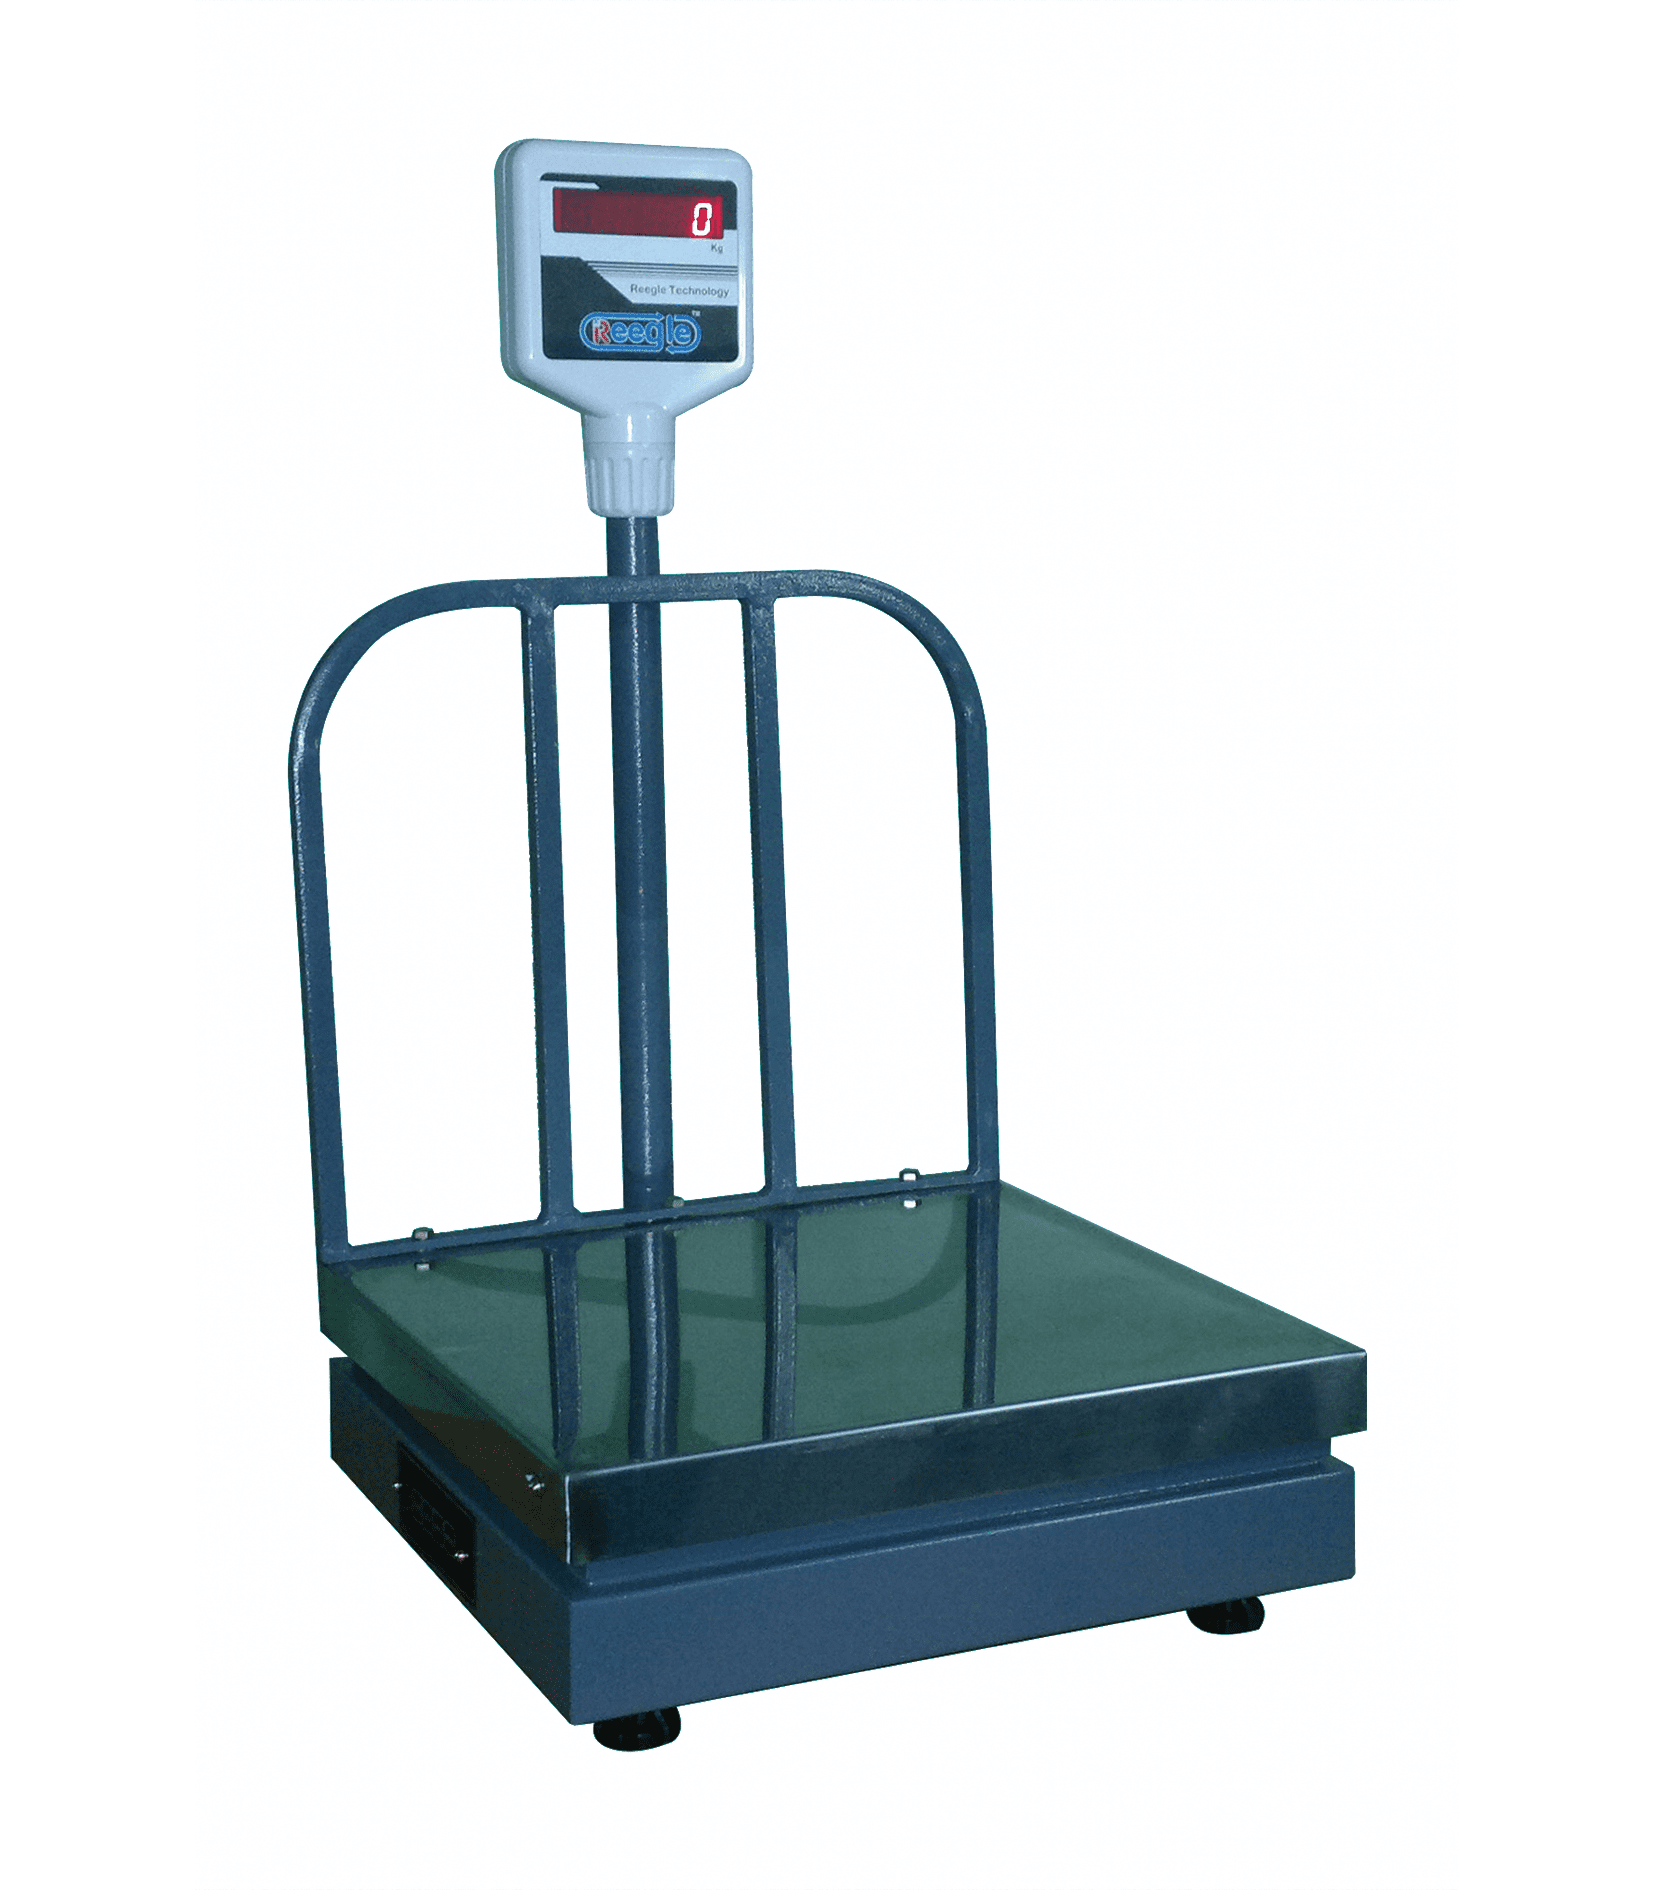 Weighing Solutions, Weighing Machines, Retail weighing solutions